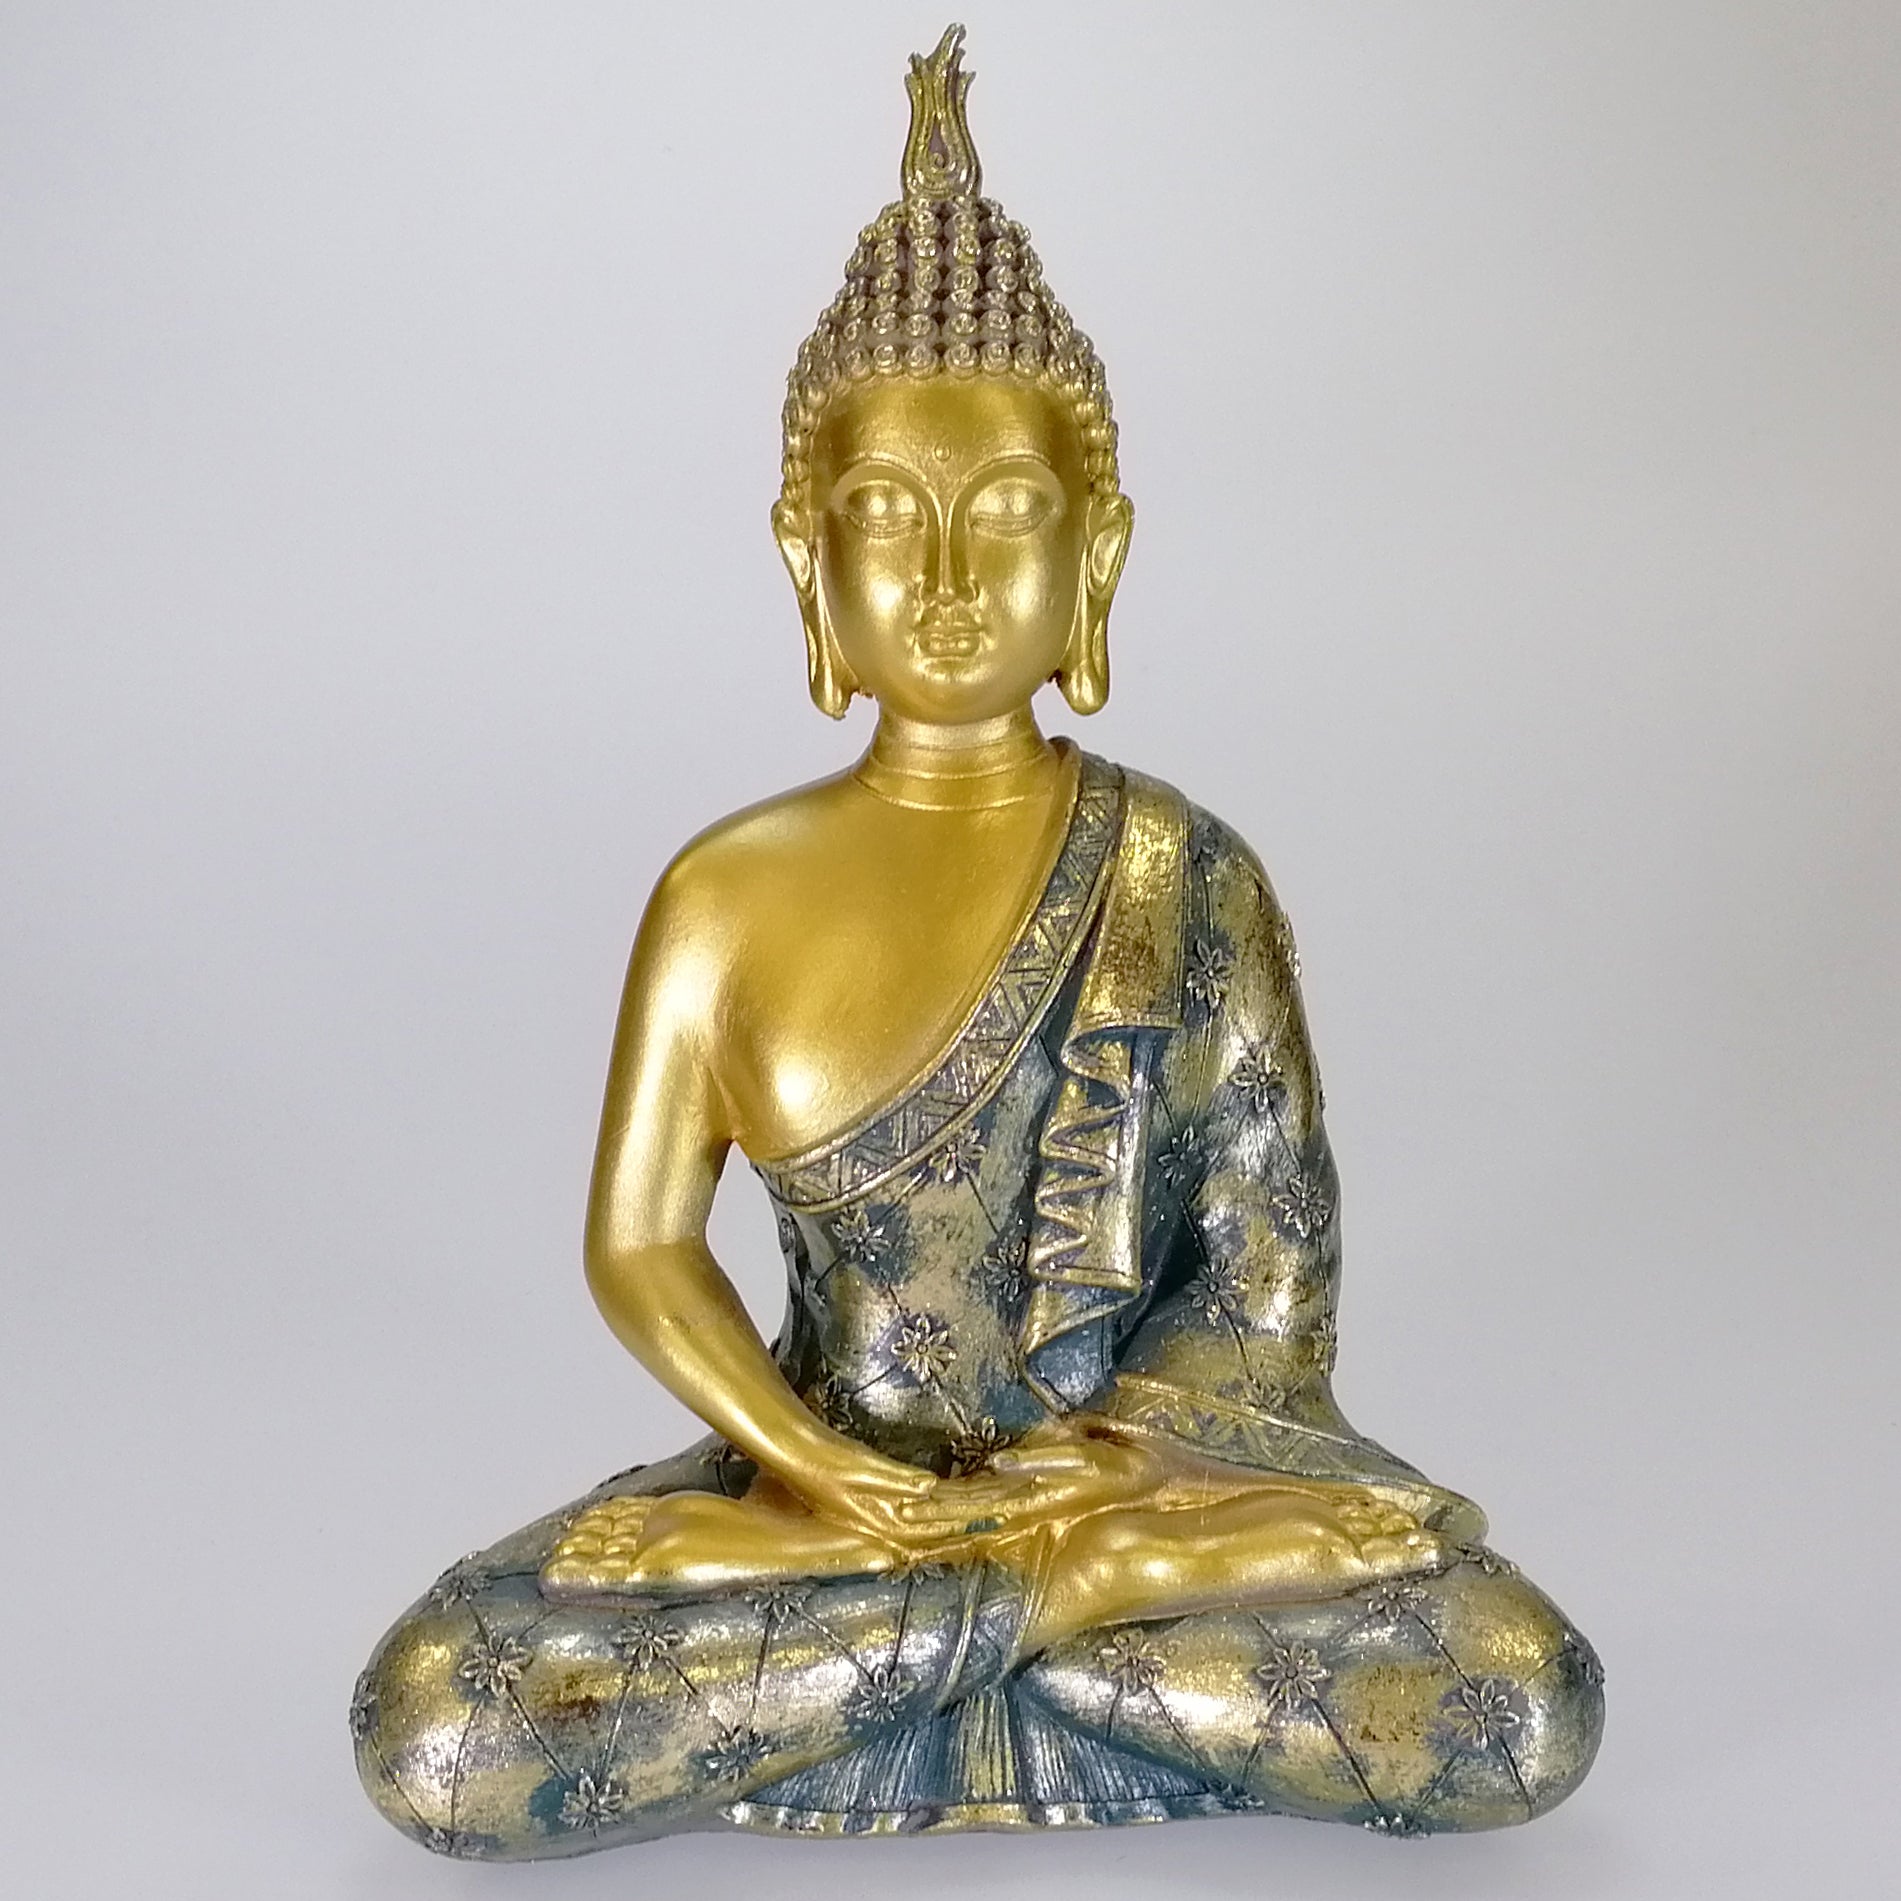 Buddha Figure - Painted Green and Gold - 25cm